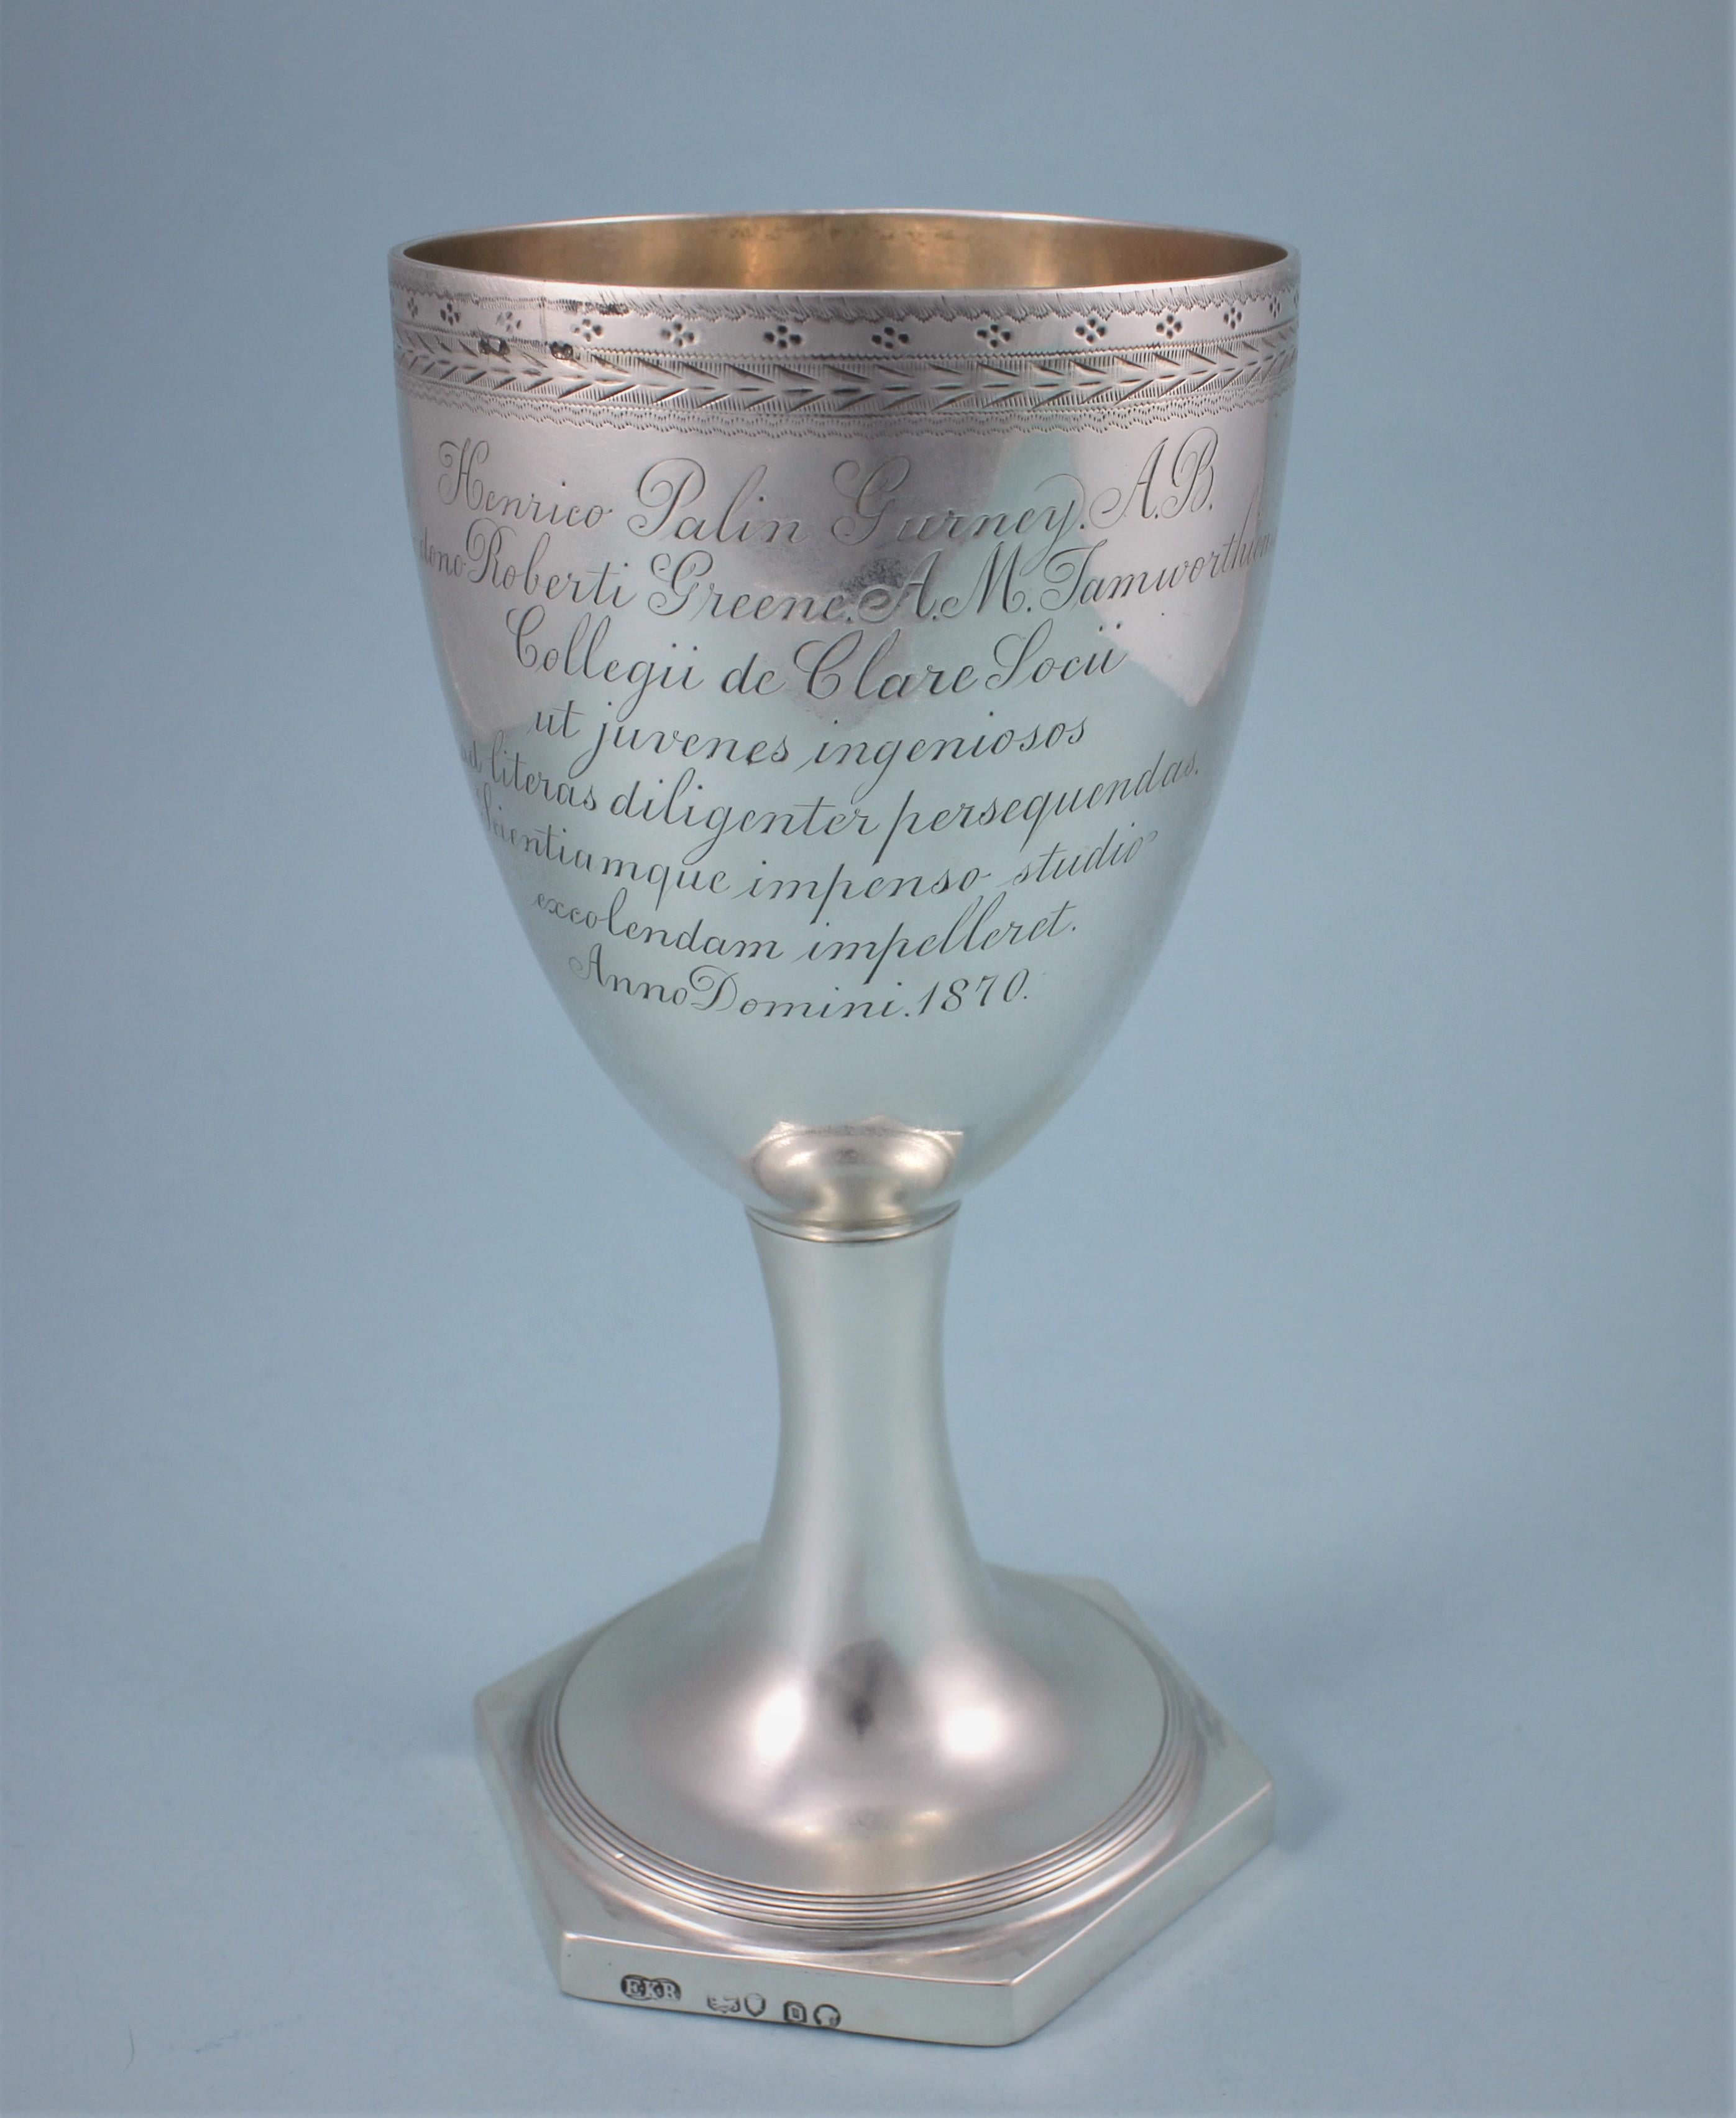 Beautifully executed Victorian sterling silver cup on reeded hexagonal foot.
Maker: E K R. Edward Ker Reid. London, 1869
The rim of the cup has bands of bright cut engraving and the coat of arms below is surrounded by bright cut decoration. The